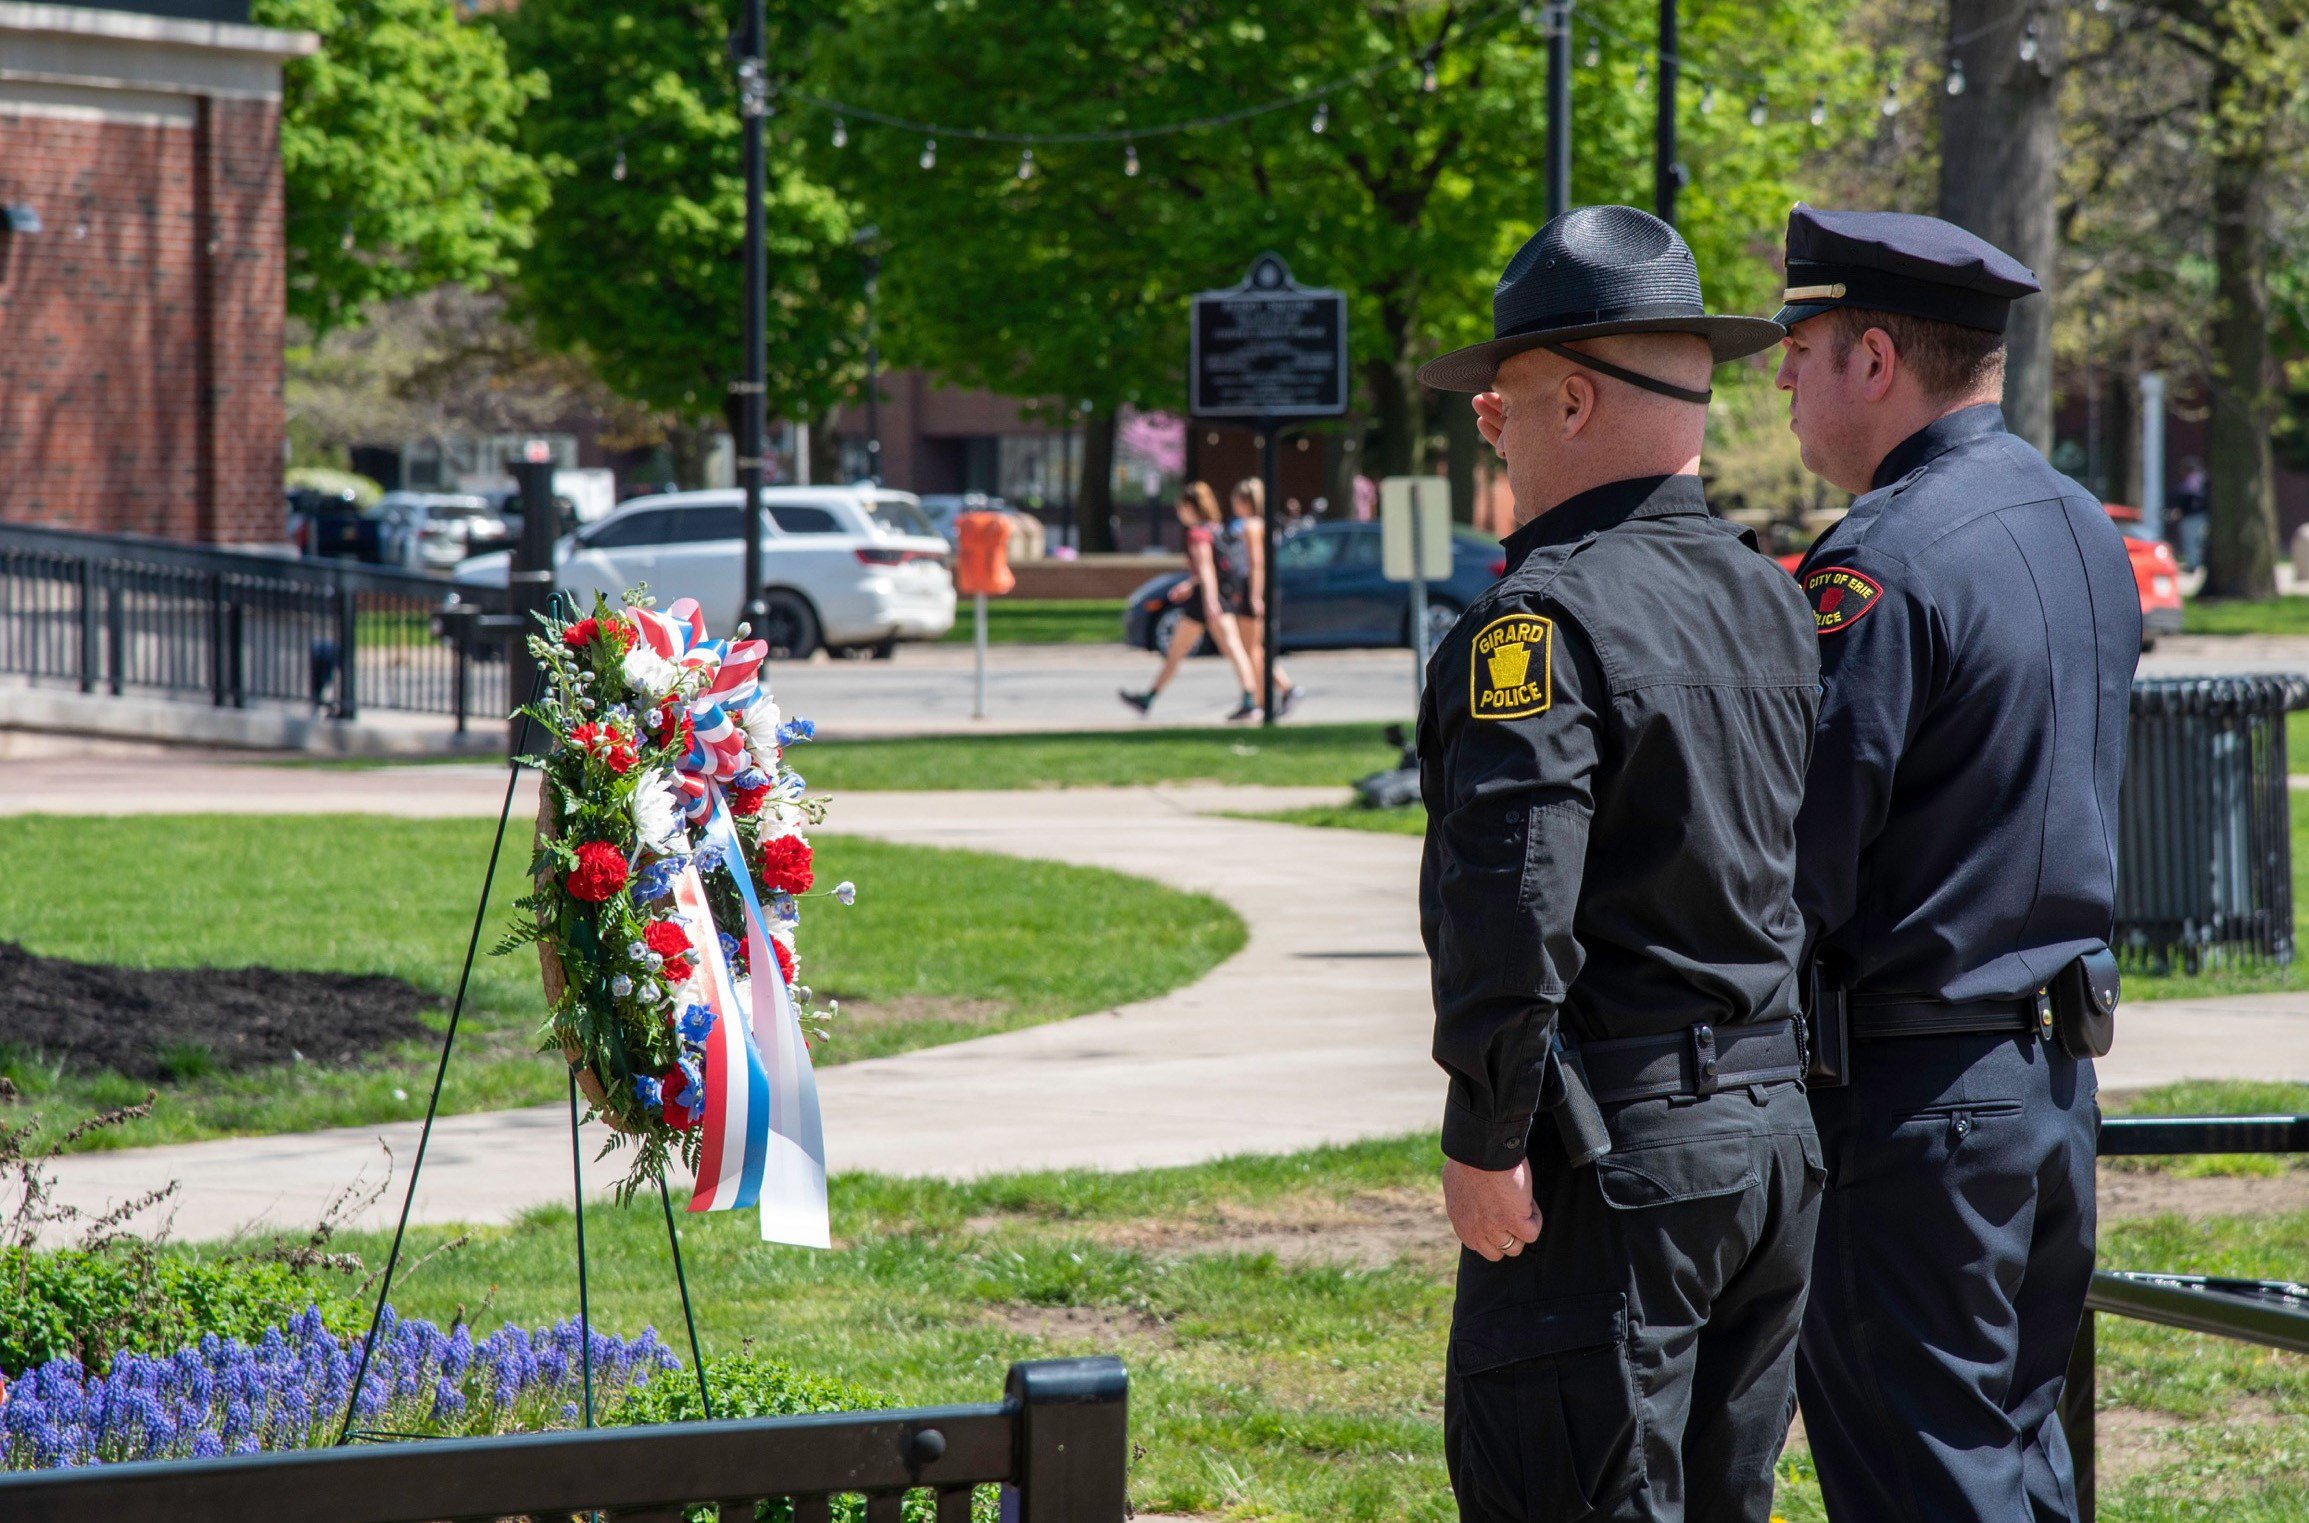 Erie County Fraternal Order of Police Lodge to Honor Fallen Officers at Memorial Service